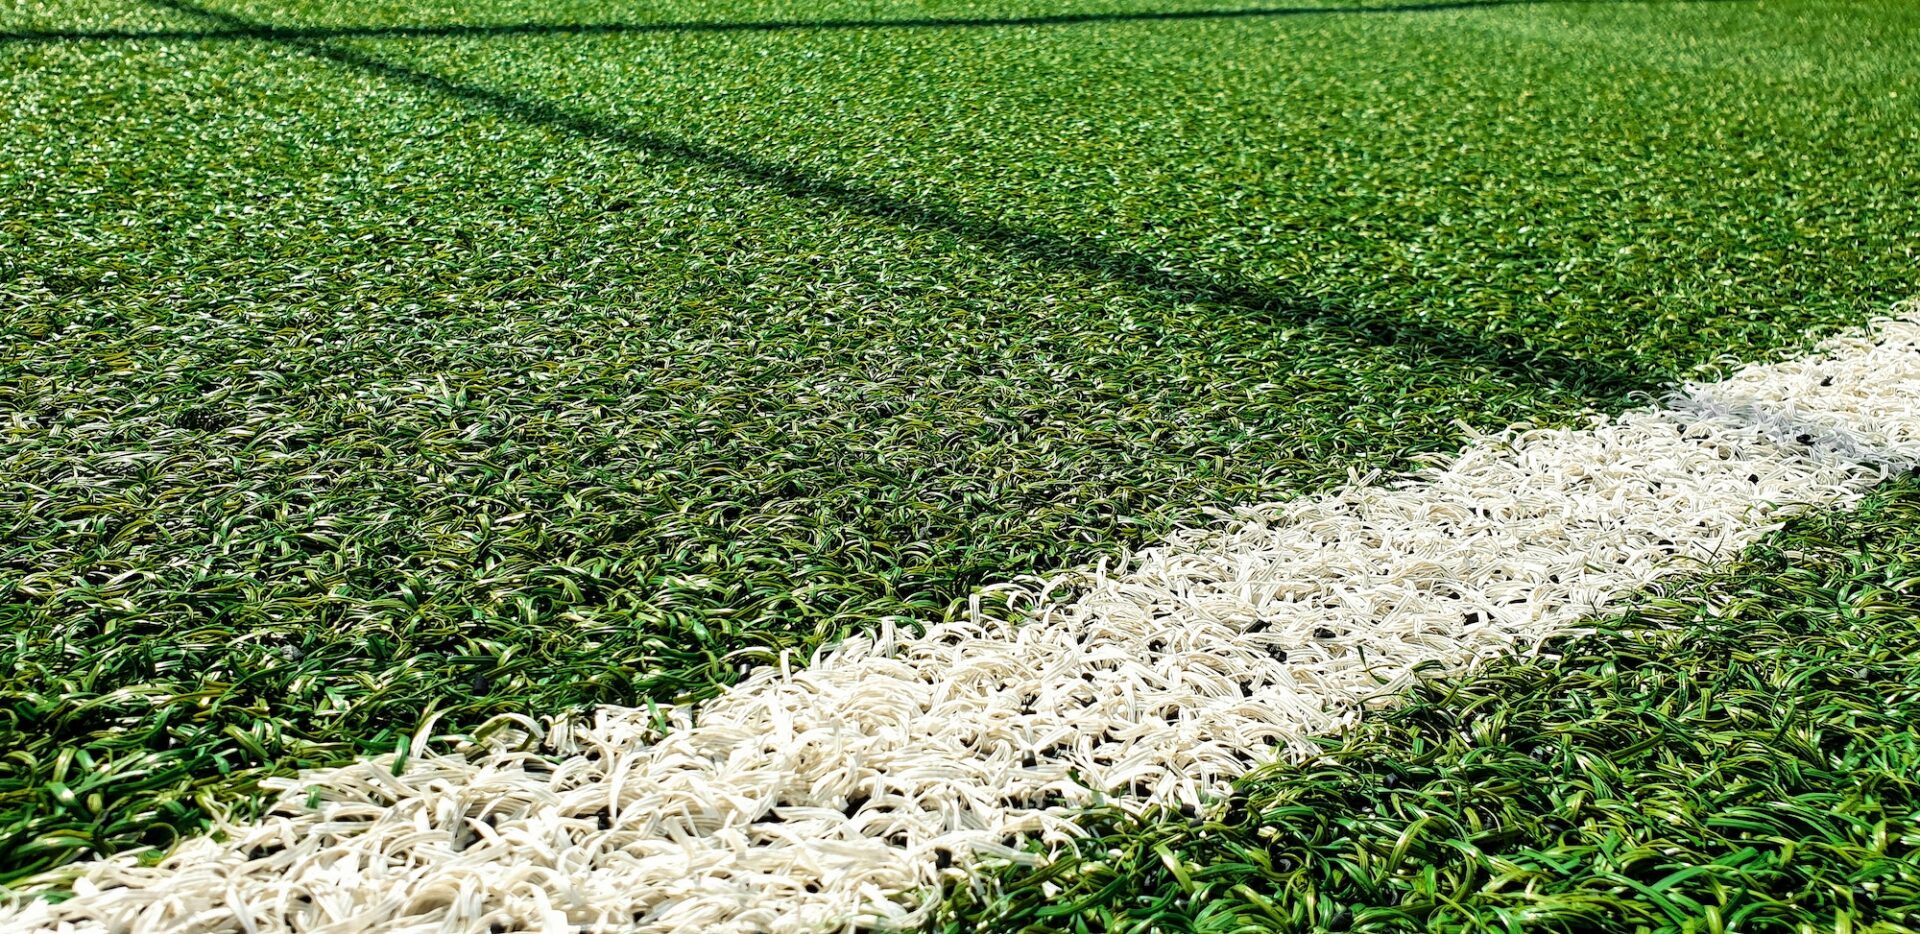 Close-up image of white line on artificial green football turf.